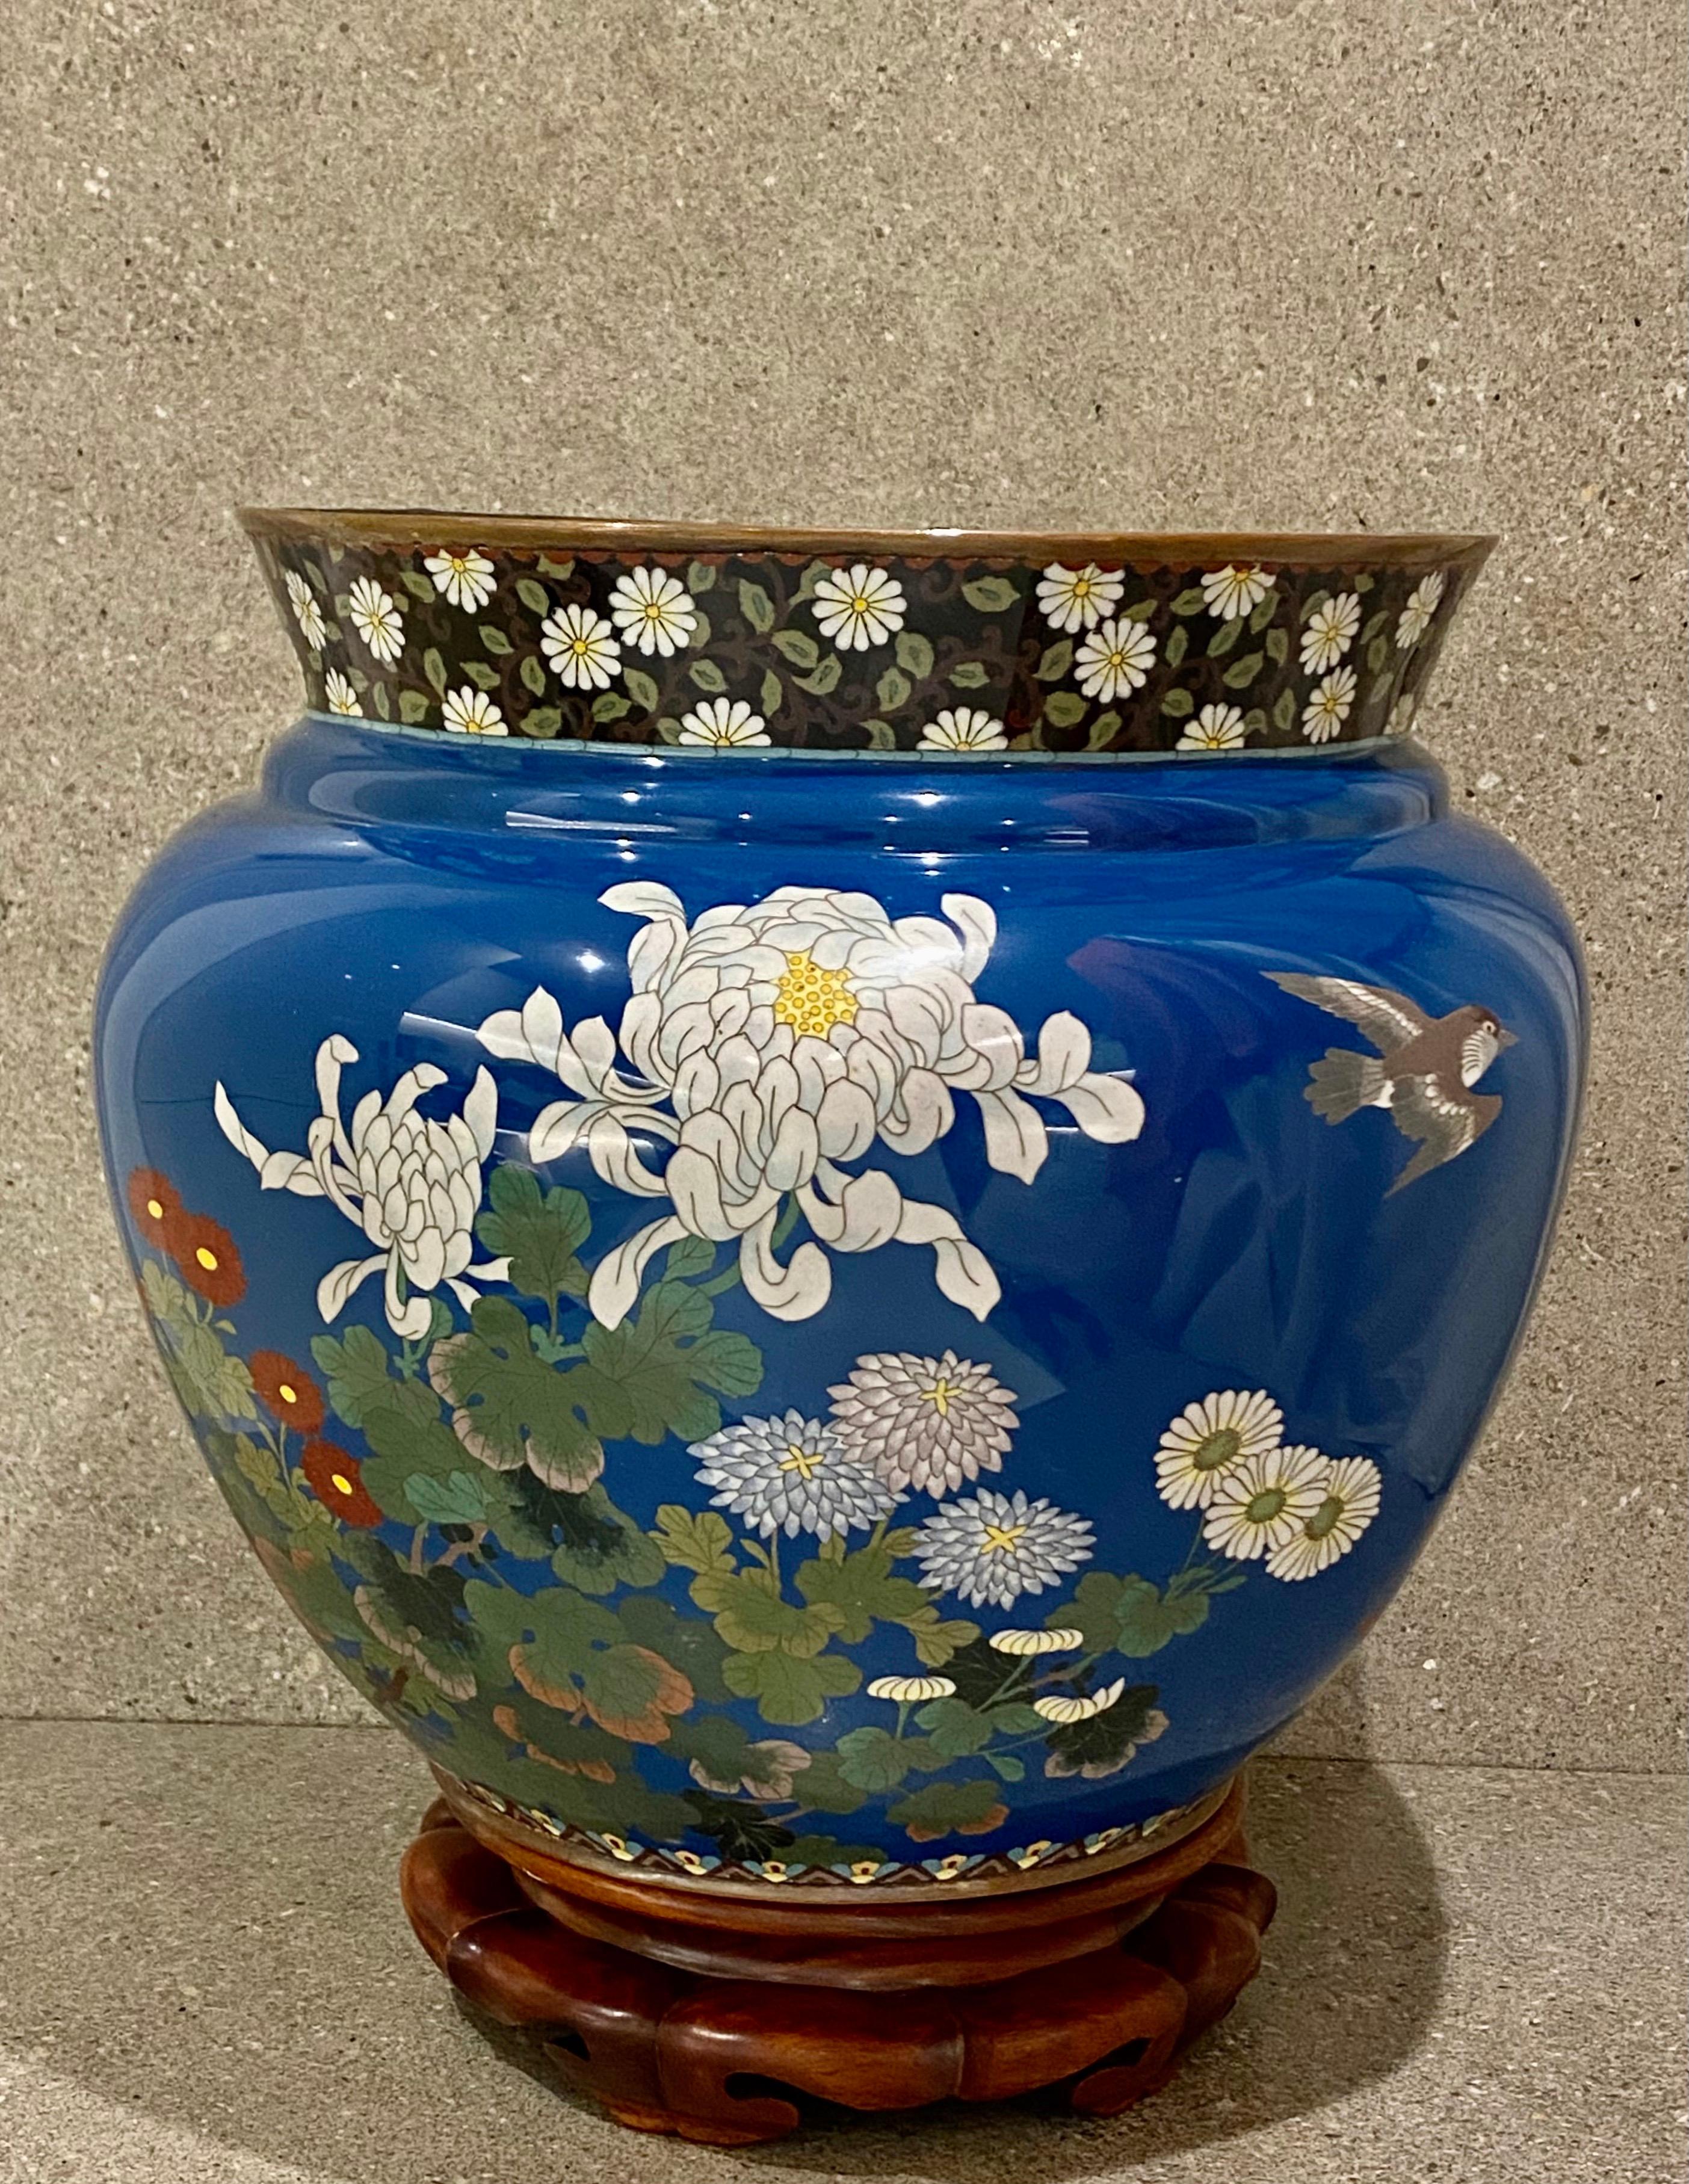 Meiji Large Japanese Cloisonne Jardiniere, Decorated with Flowers and Birds